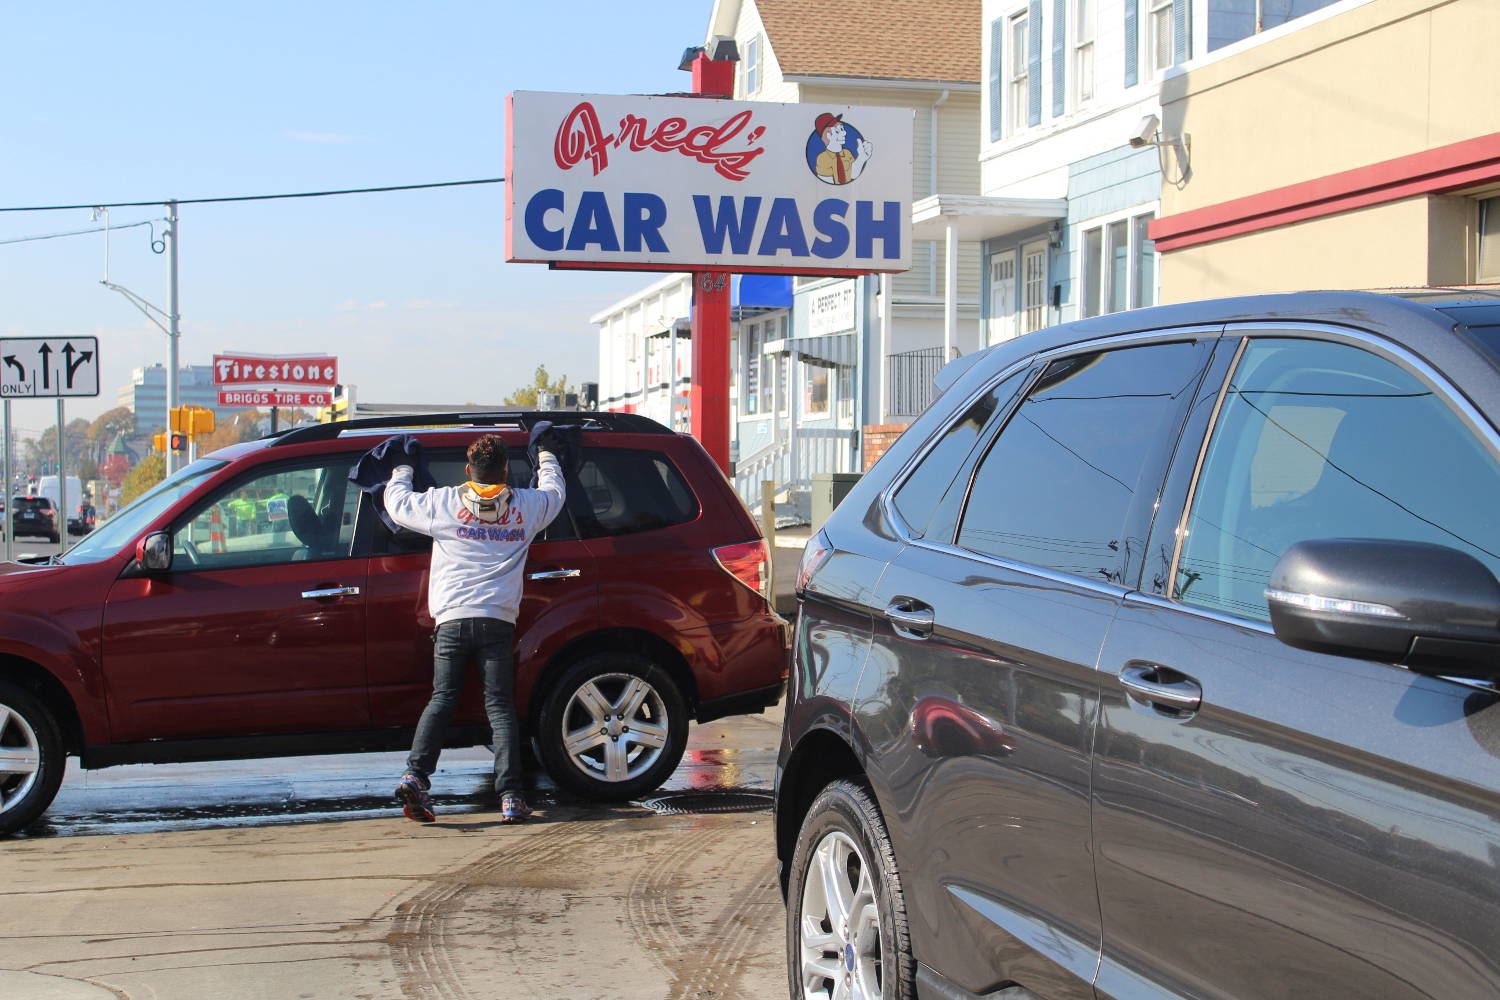 Fred’s is your Closest Car Wash in Connecticut